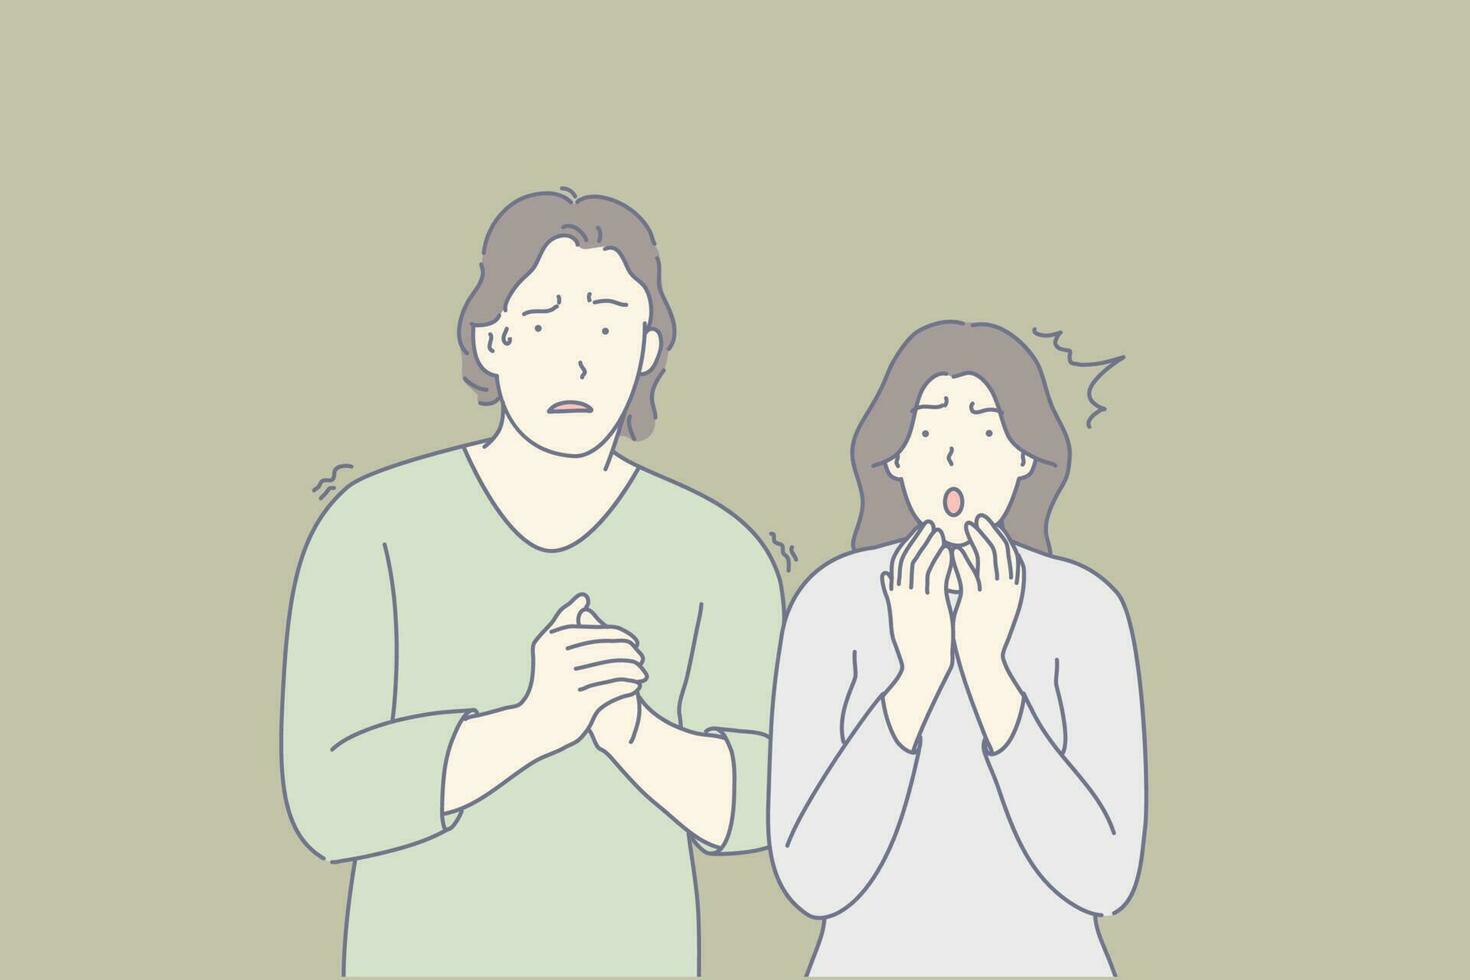 Frightened people, scared couple, shocked friends concept. Man and woman trembling with fear. Nervous guy sweating, clasping hands. Terrified lady panicking. Emotional tension. Simple flat vector